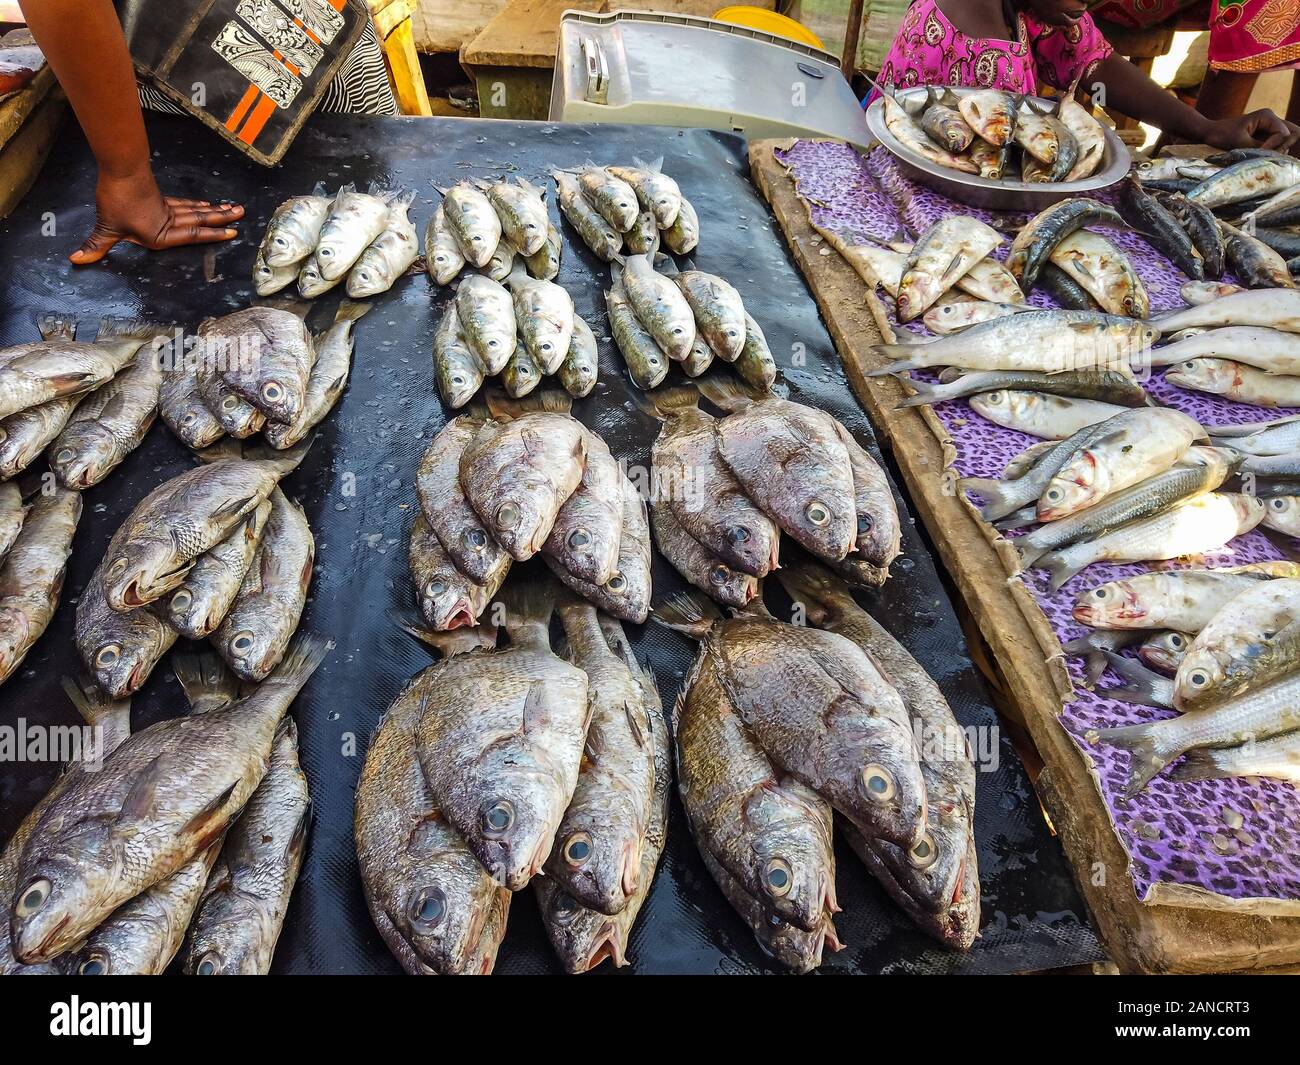 Fresh fish lies on a table at a fish market in Mbour, Senegal. It's near Dakar, Africa. They are large and small fish of different species. Stock Photo